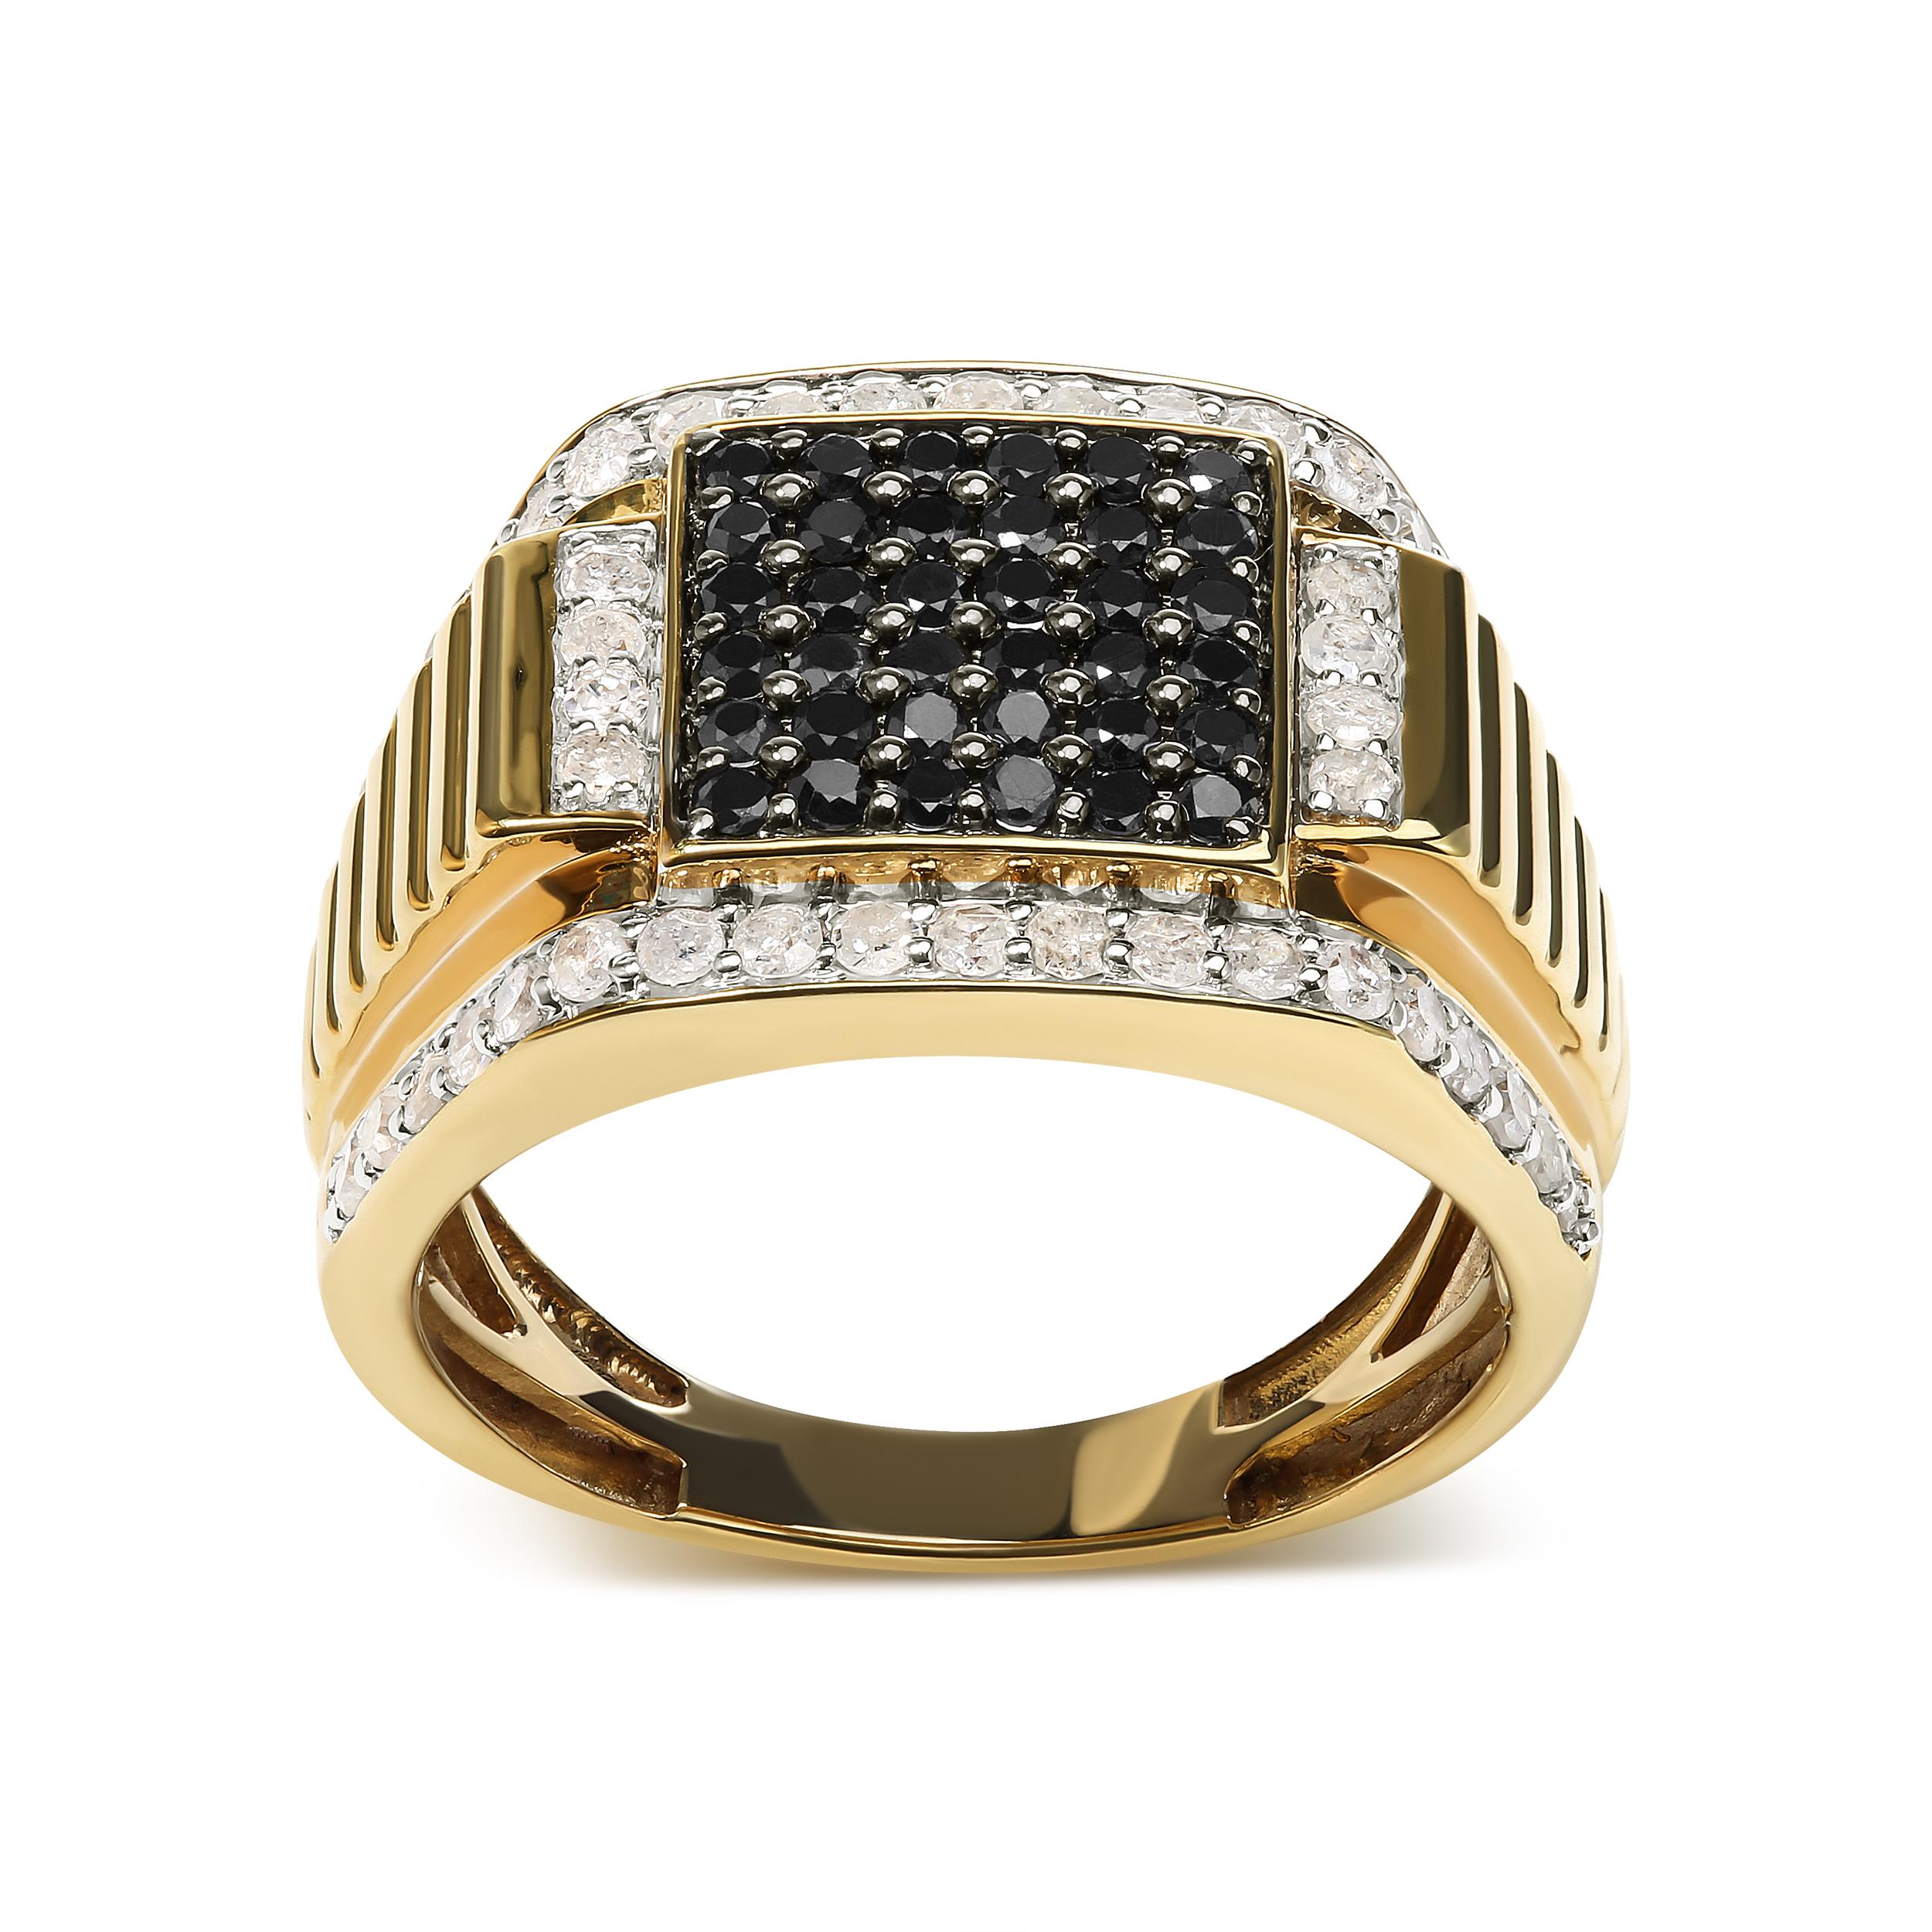 Embrace the allure of contrast with this remarkable men's cluster ring. Plated in 14K yellow gold, the .925 sterling silver band serves as the canvas for a mesmerizing display of diamonds. A total of 82 diamonds grace this ring, with 36 round-cut,